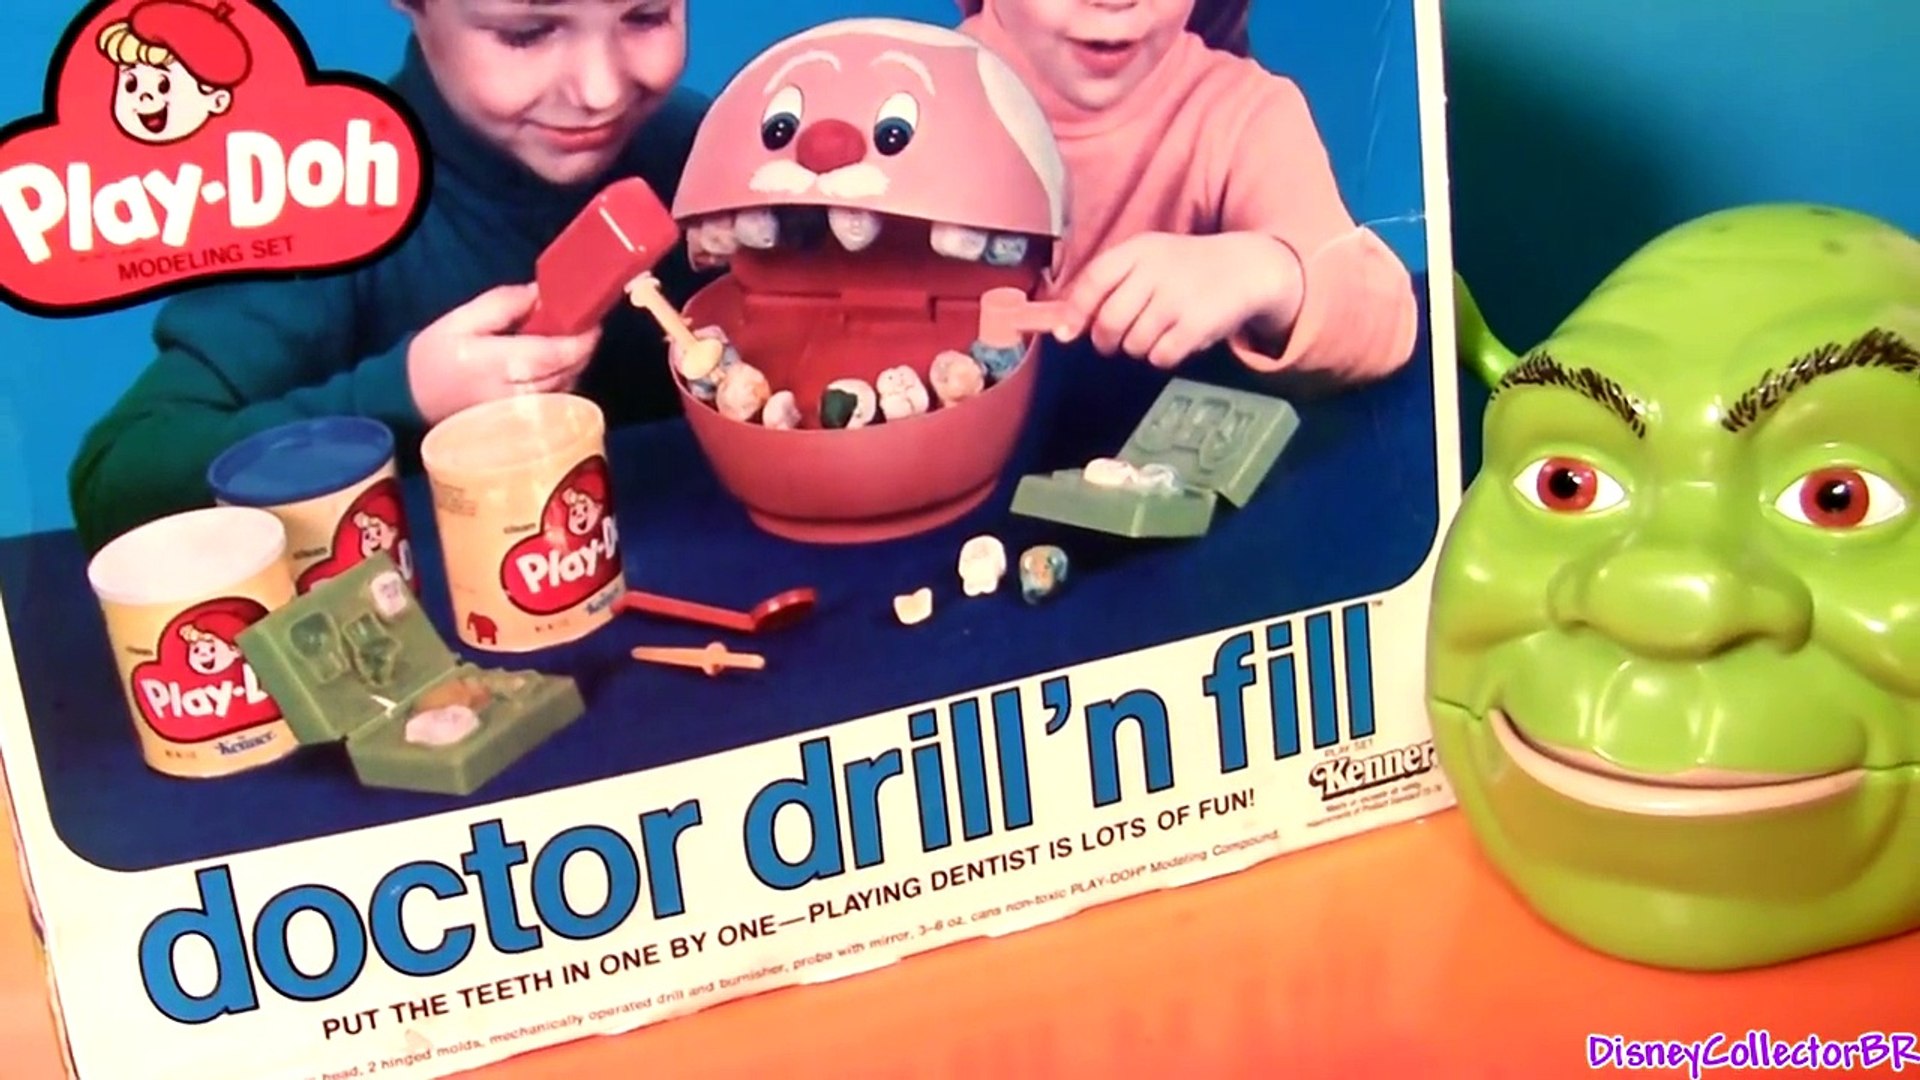 play doh doctor drill n fill